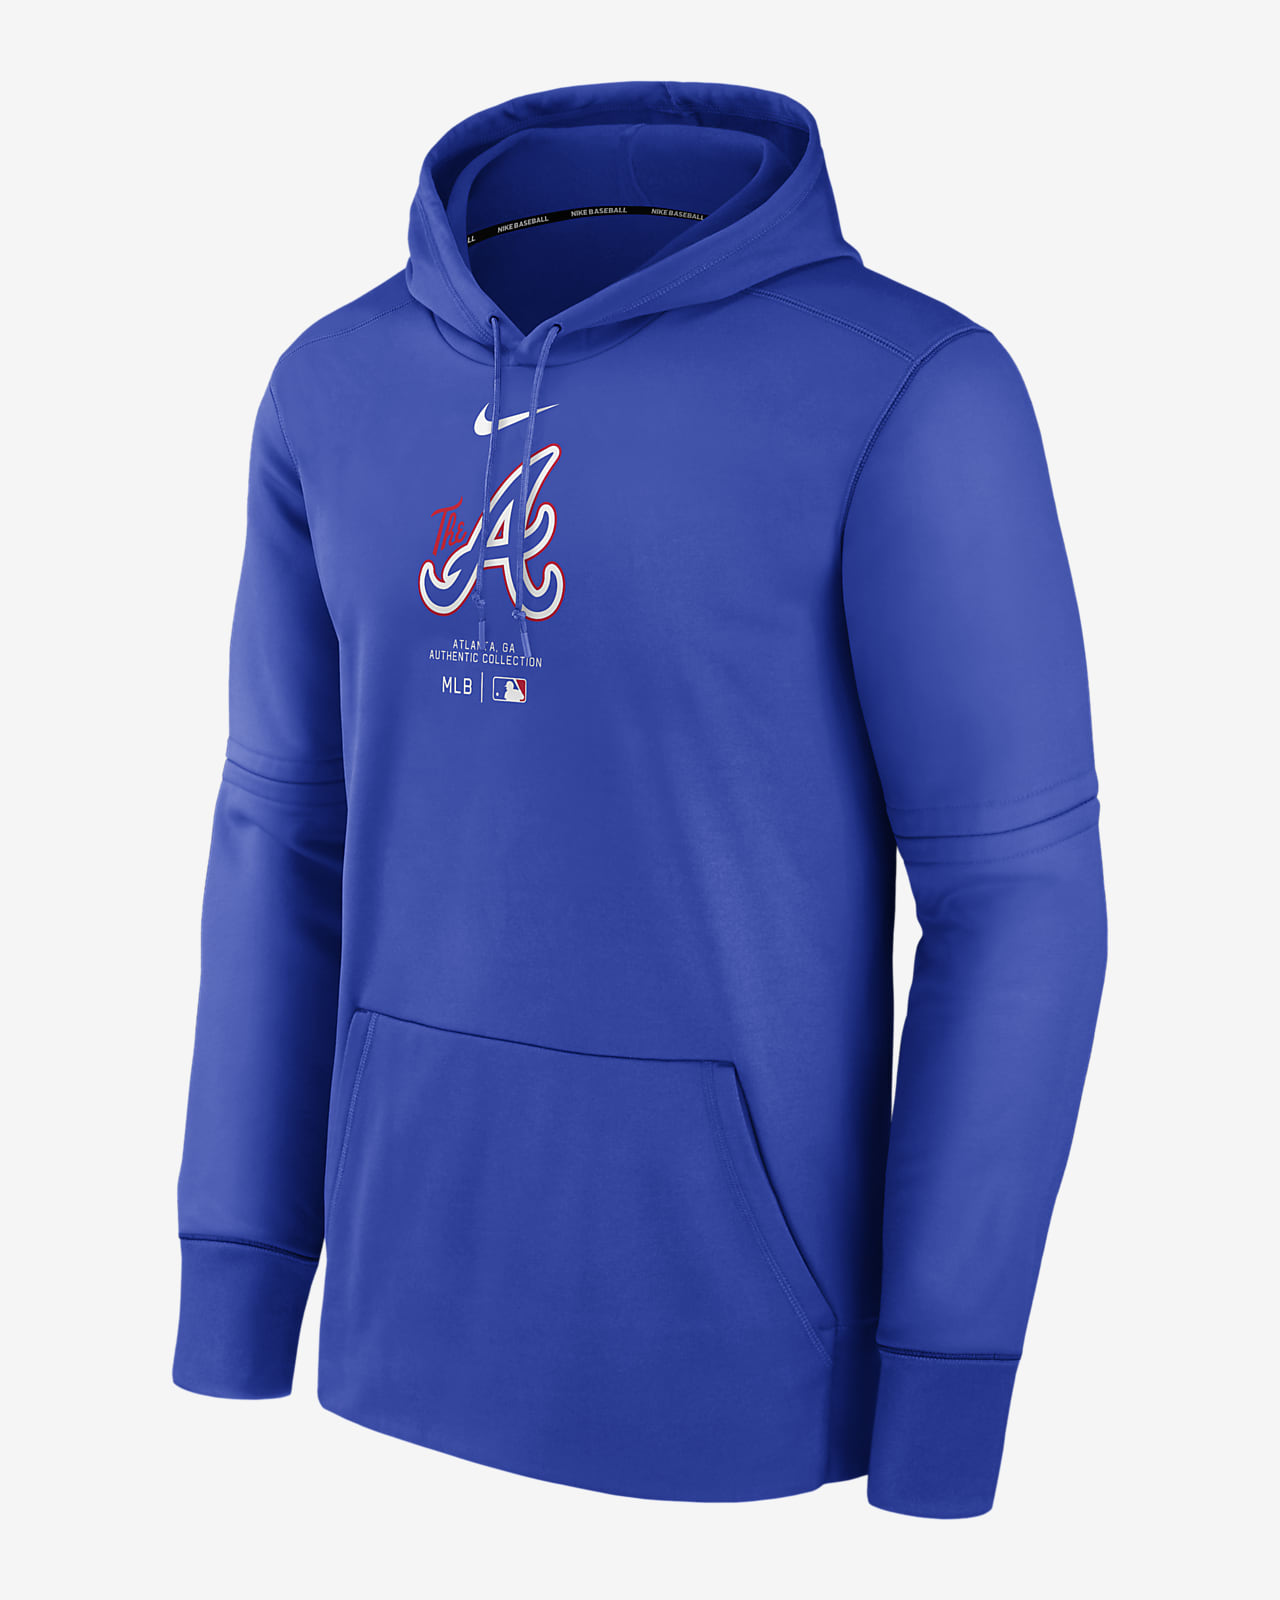 https://static.nike.com/a/images/t_PDP_1280_v1/f_auto,q_auto:eco/6fd360f4-fb88-4dc5-8723-a22abb77aa5b/atlanta-braves-city-connect-practice-mens-therma-pullover-hoodie-BCcpqS.png